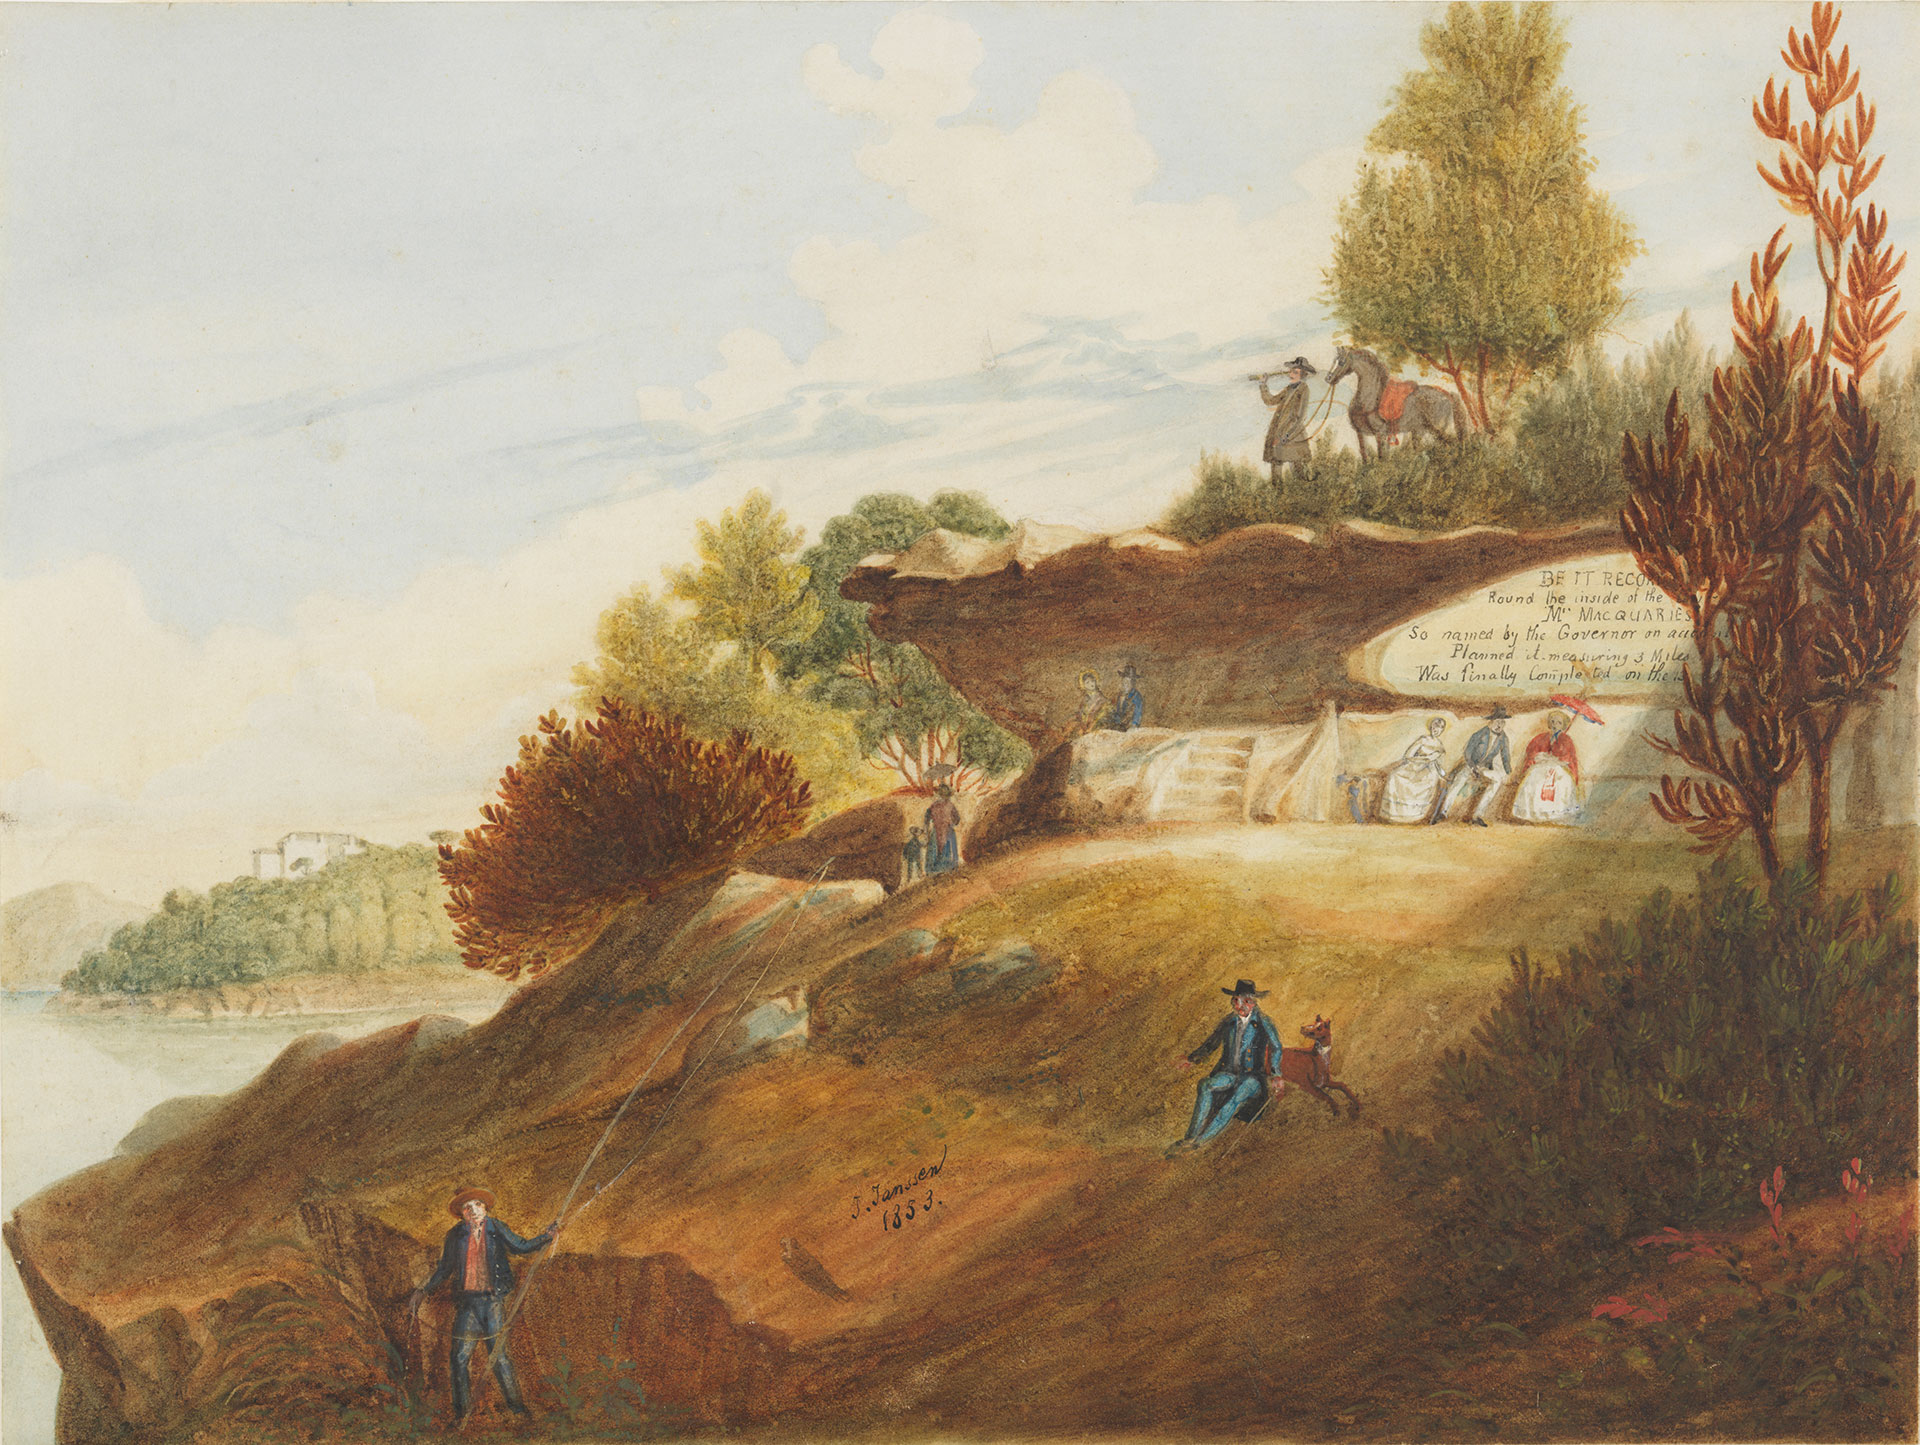 A painting of a view of a large carved-out rock ledge, with several people sitting and resting in the vicinity.